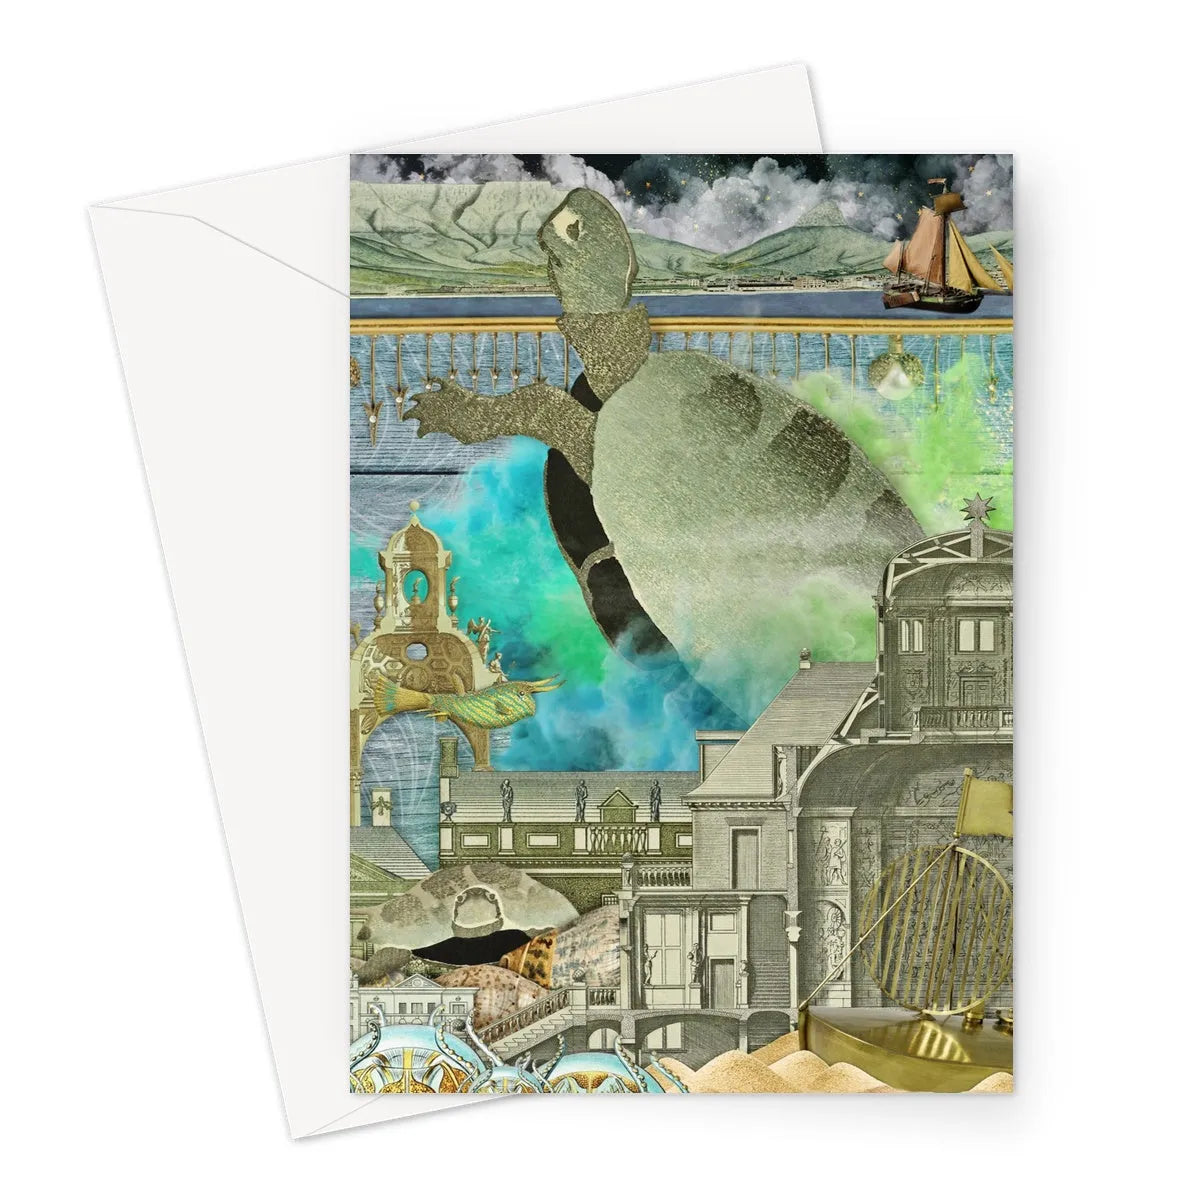 Down Where It’s Wetter Part 3 Greeting Card - A5 Portrait / 1 Card - Greeting & Note Cards - Aesthetic Art